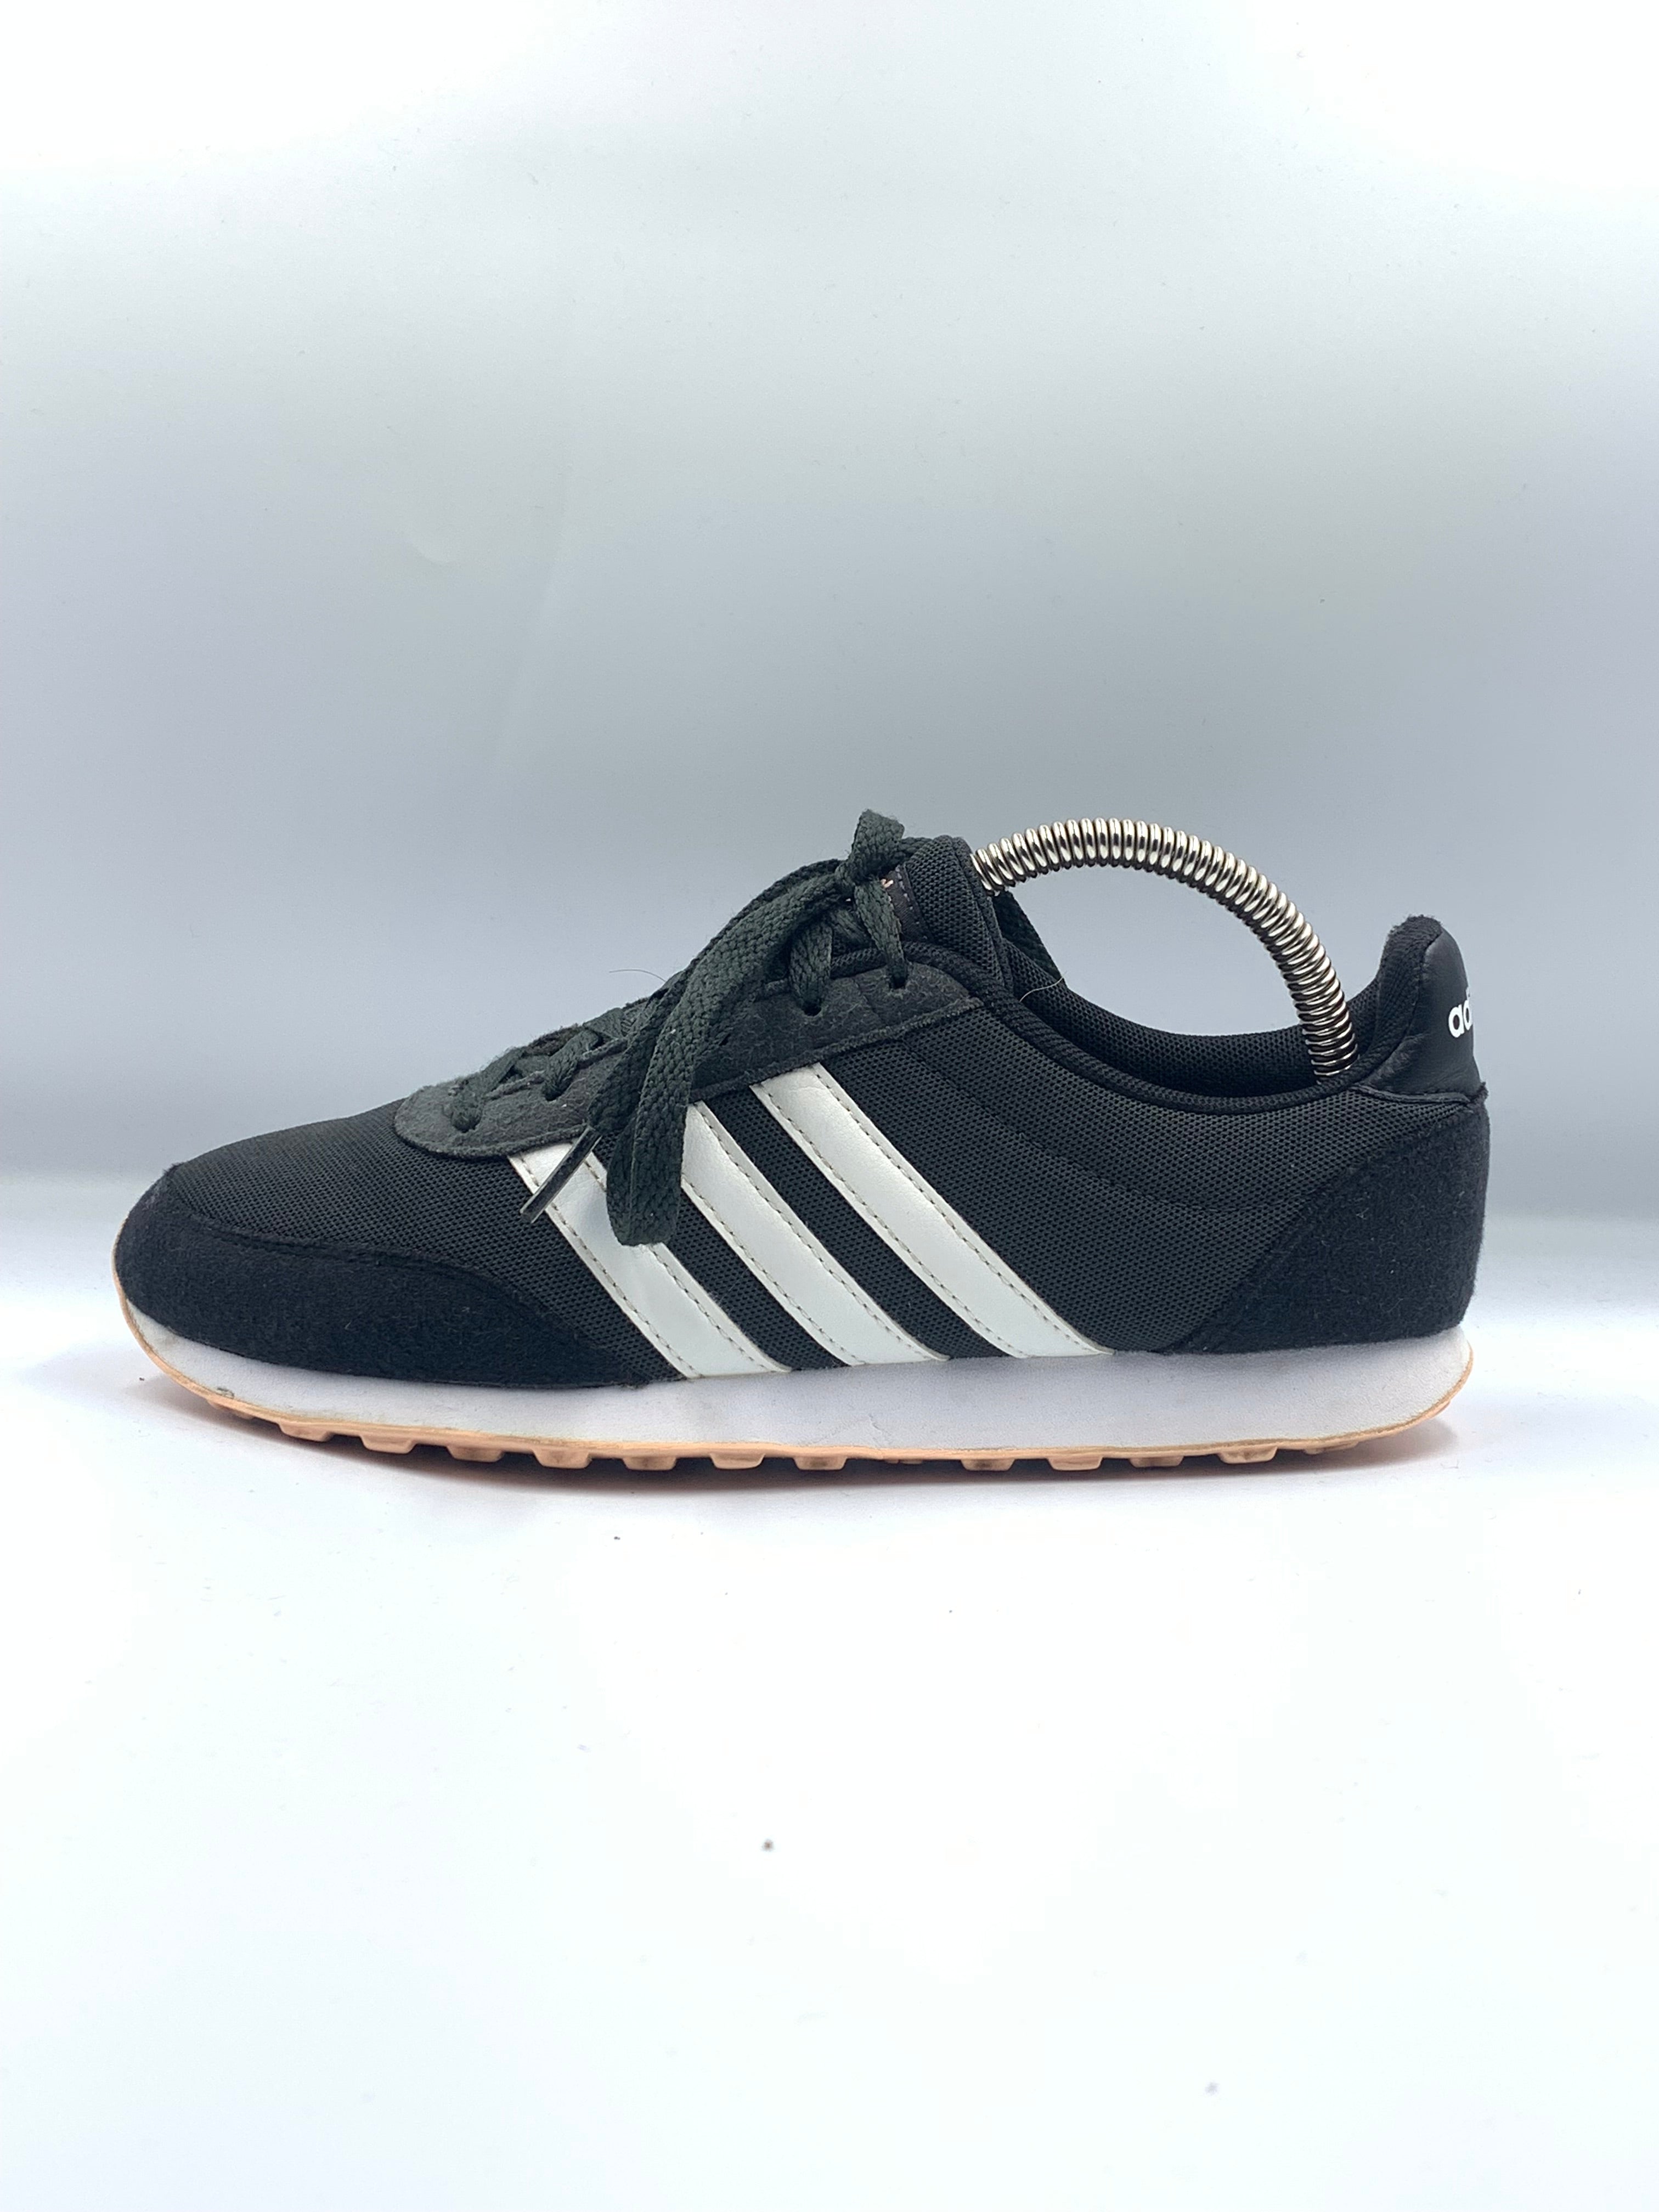 Adidas Brand Sports Black Running For Women Shoes